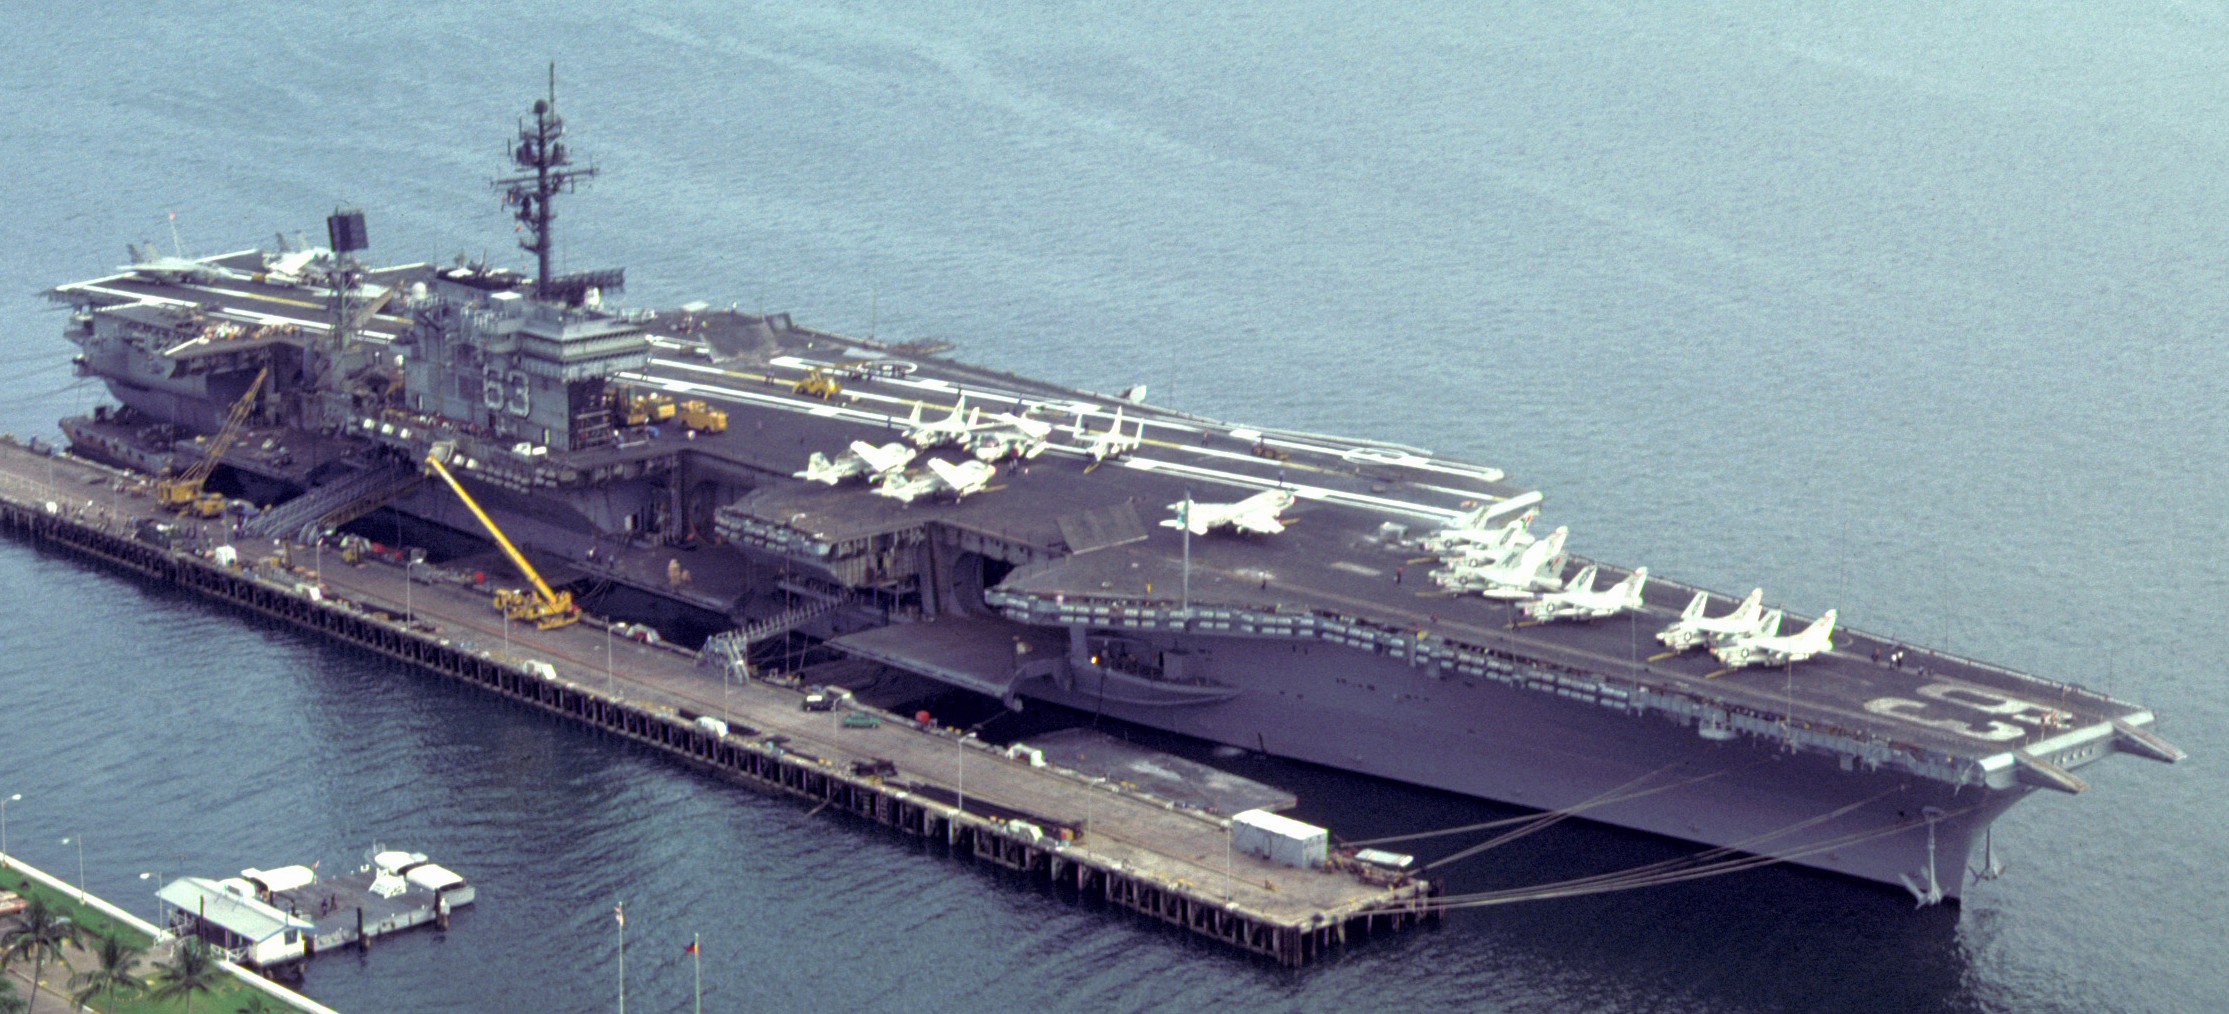 cv-63 uss kitty hawk aircraft carrier air wing cvw-15 us navy 316 subic bay philippines